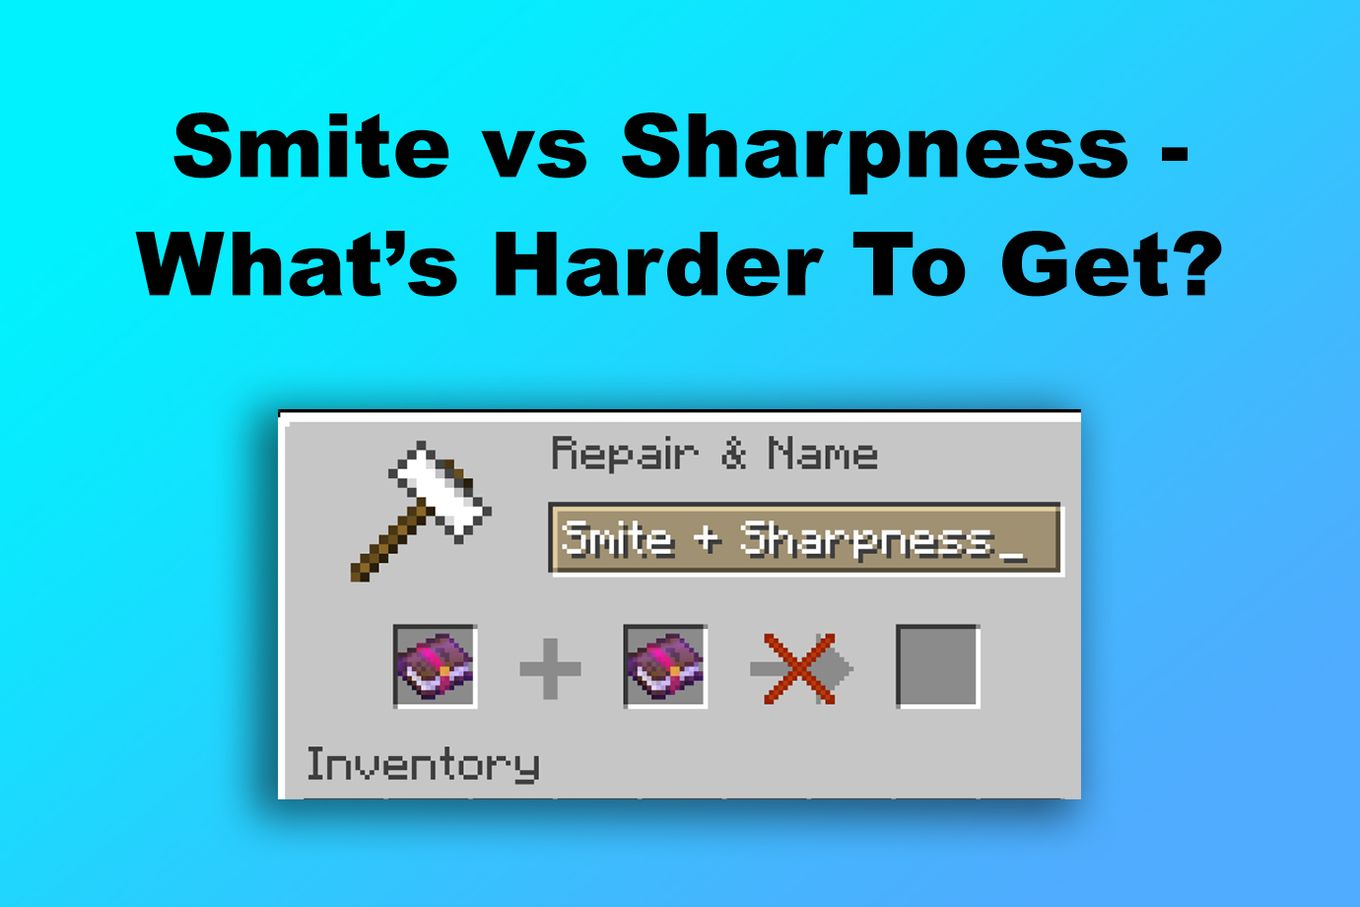 Smite vs Sharpness - What’s Harder To Get?